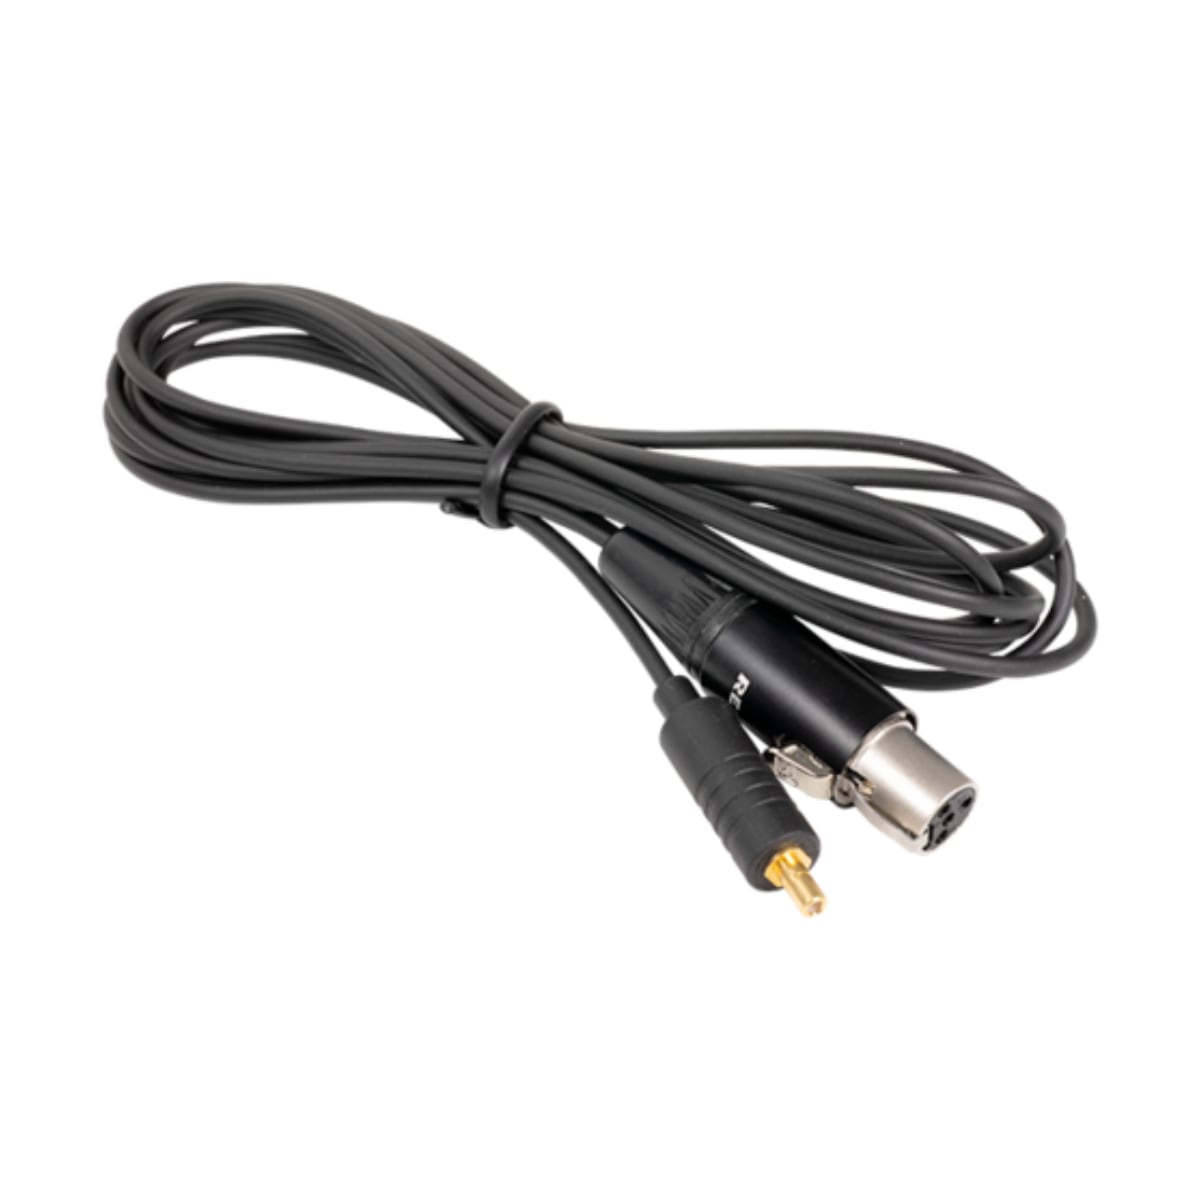 Neumann Connection cable for the Miniature Clip Mic system 1.8 m to 4pin mini XLR